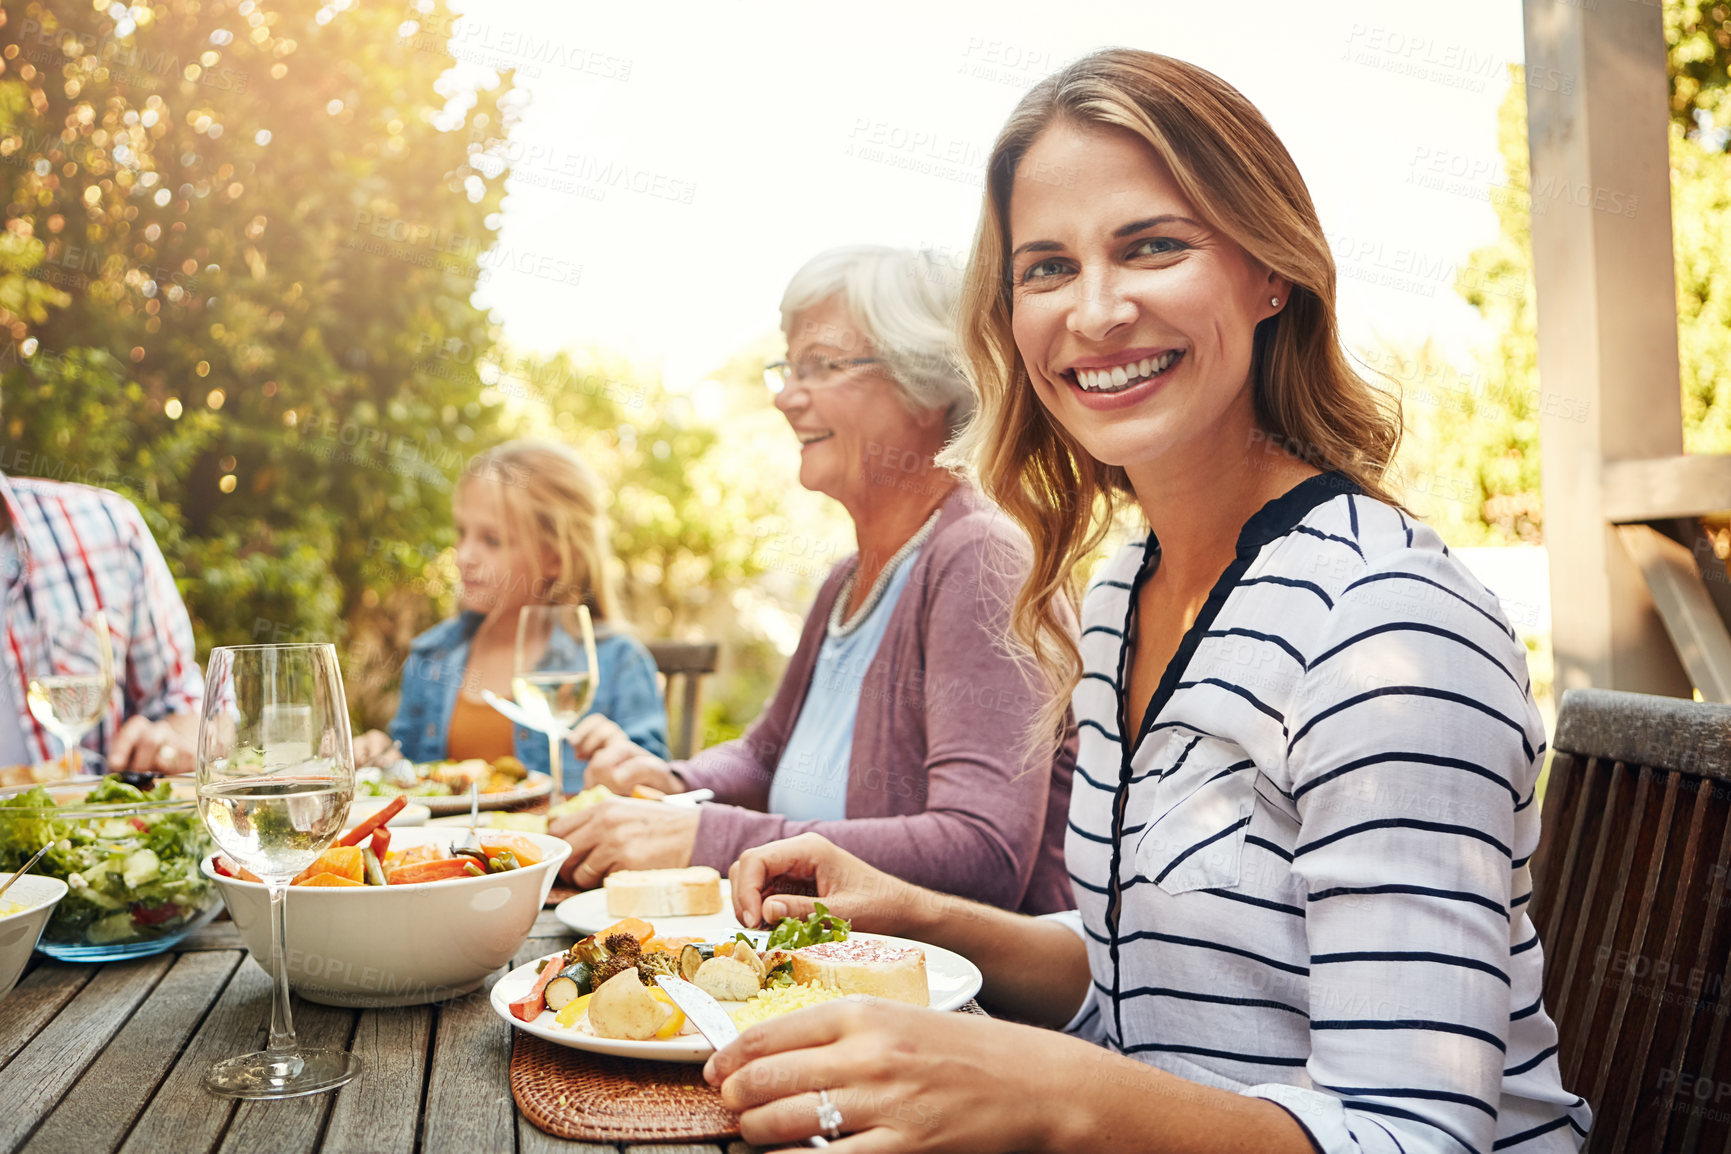 Buy stock photo Portrait of a happy woman enjoying an outdoor lunch with her family